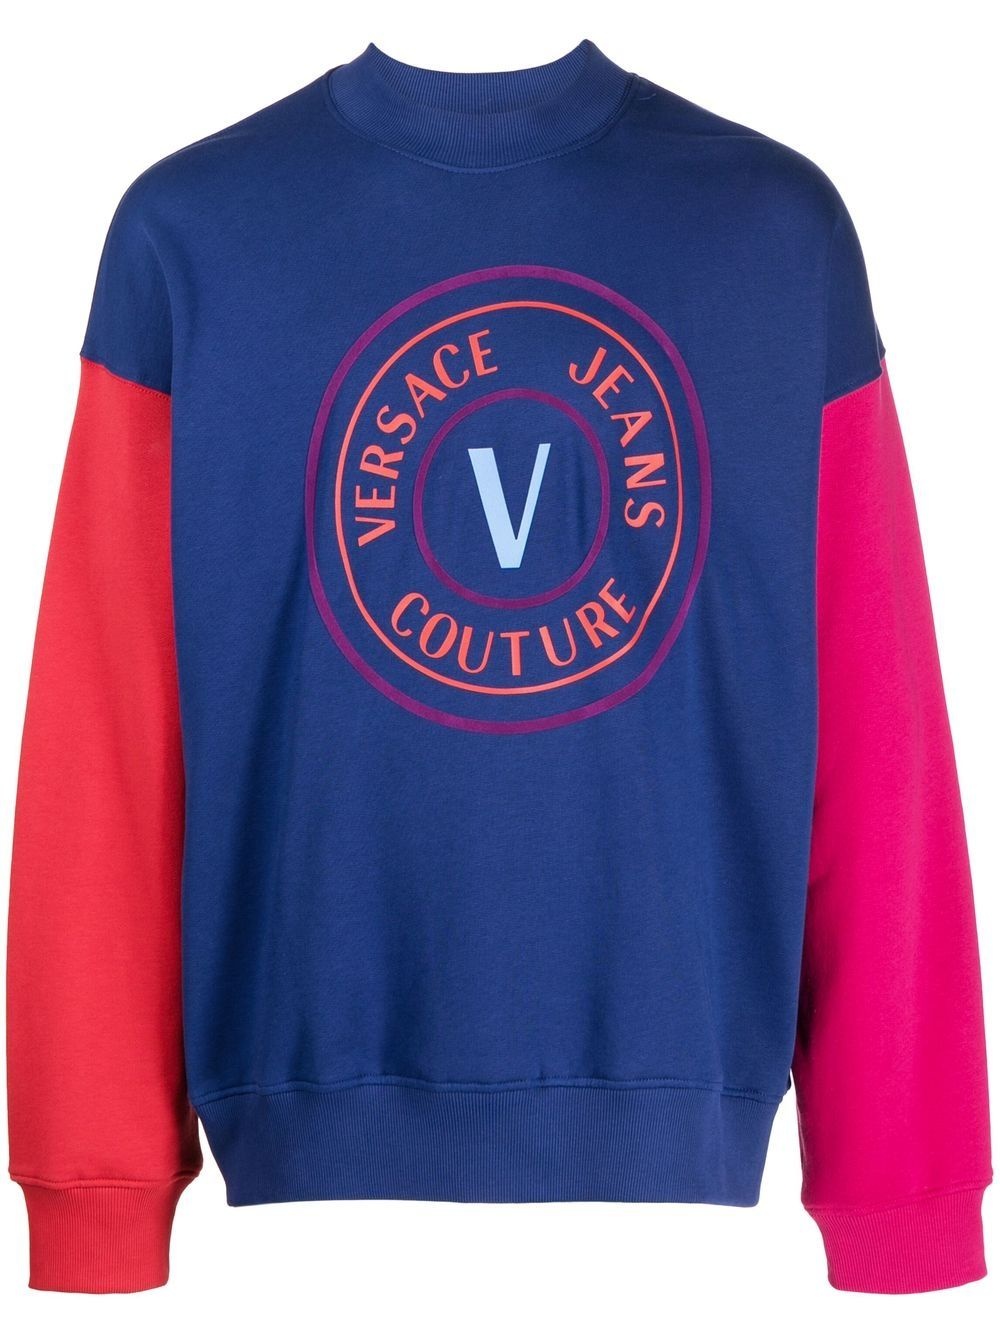 Versace Jeans Couture Sweatshirt With Logo M at FORZIERI